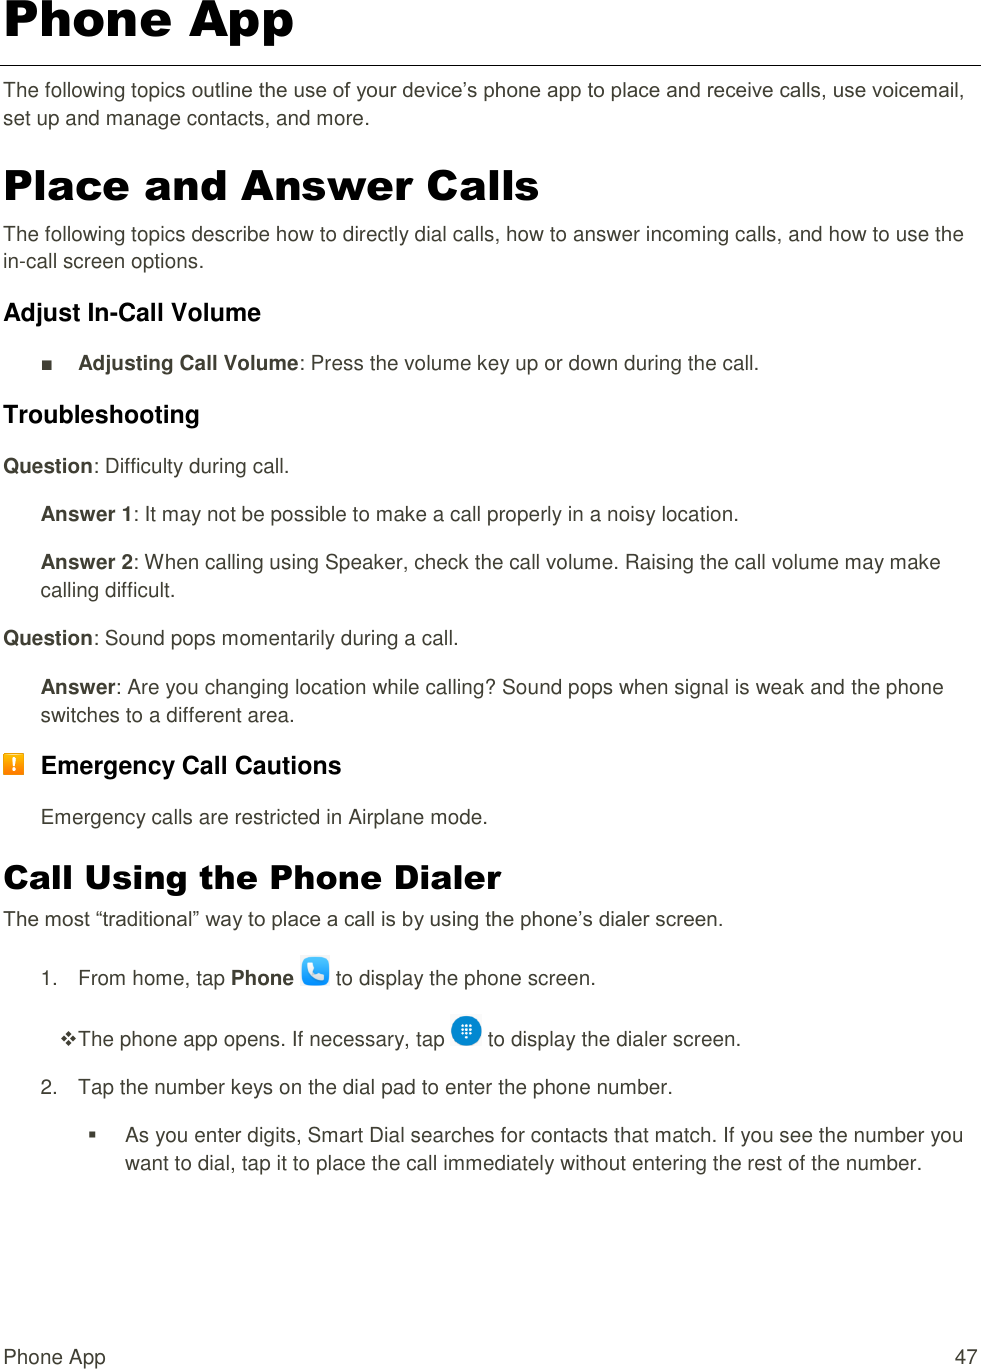 Phone App  47 Phone App The following topics outline the use of your device’s phone app to place and receive calls, use voicemail, set up and manage contacts, and more. Place and Answer Calls The following topics describe how to directly dial calls, how to answer incoming calls, and how to use the in-call screen options. Adjust In-Call Volume ■ Adjusting Call Volume: Press the volume key up or down during the call. Troubleshooting Question: Difficulty during call. Answer 1: It may not be possible to make a call properly in a noisy location. Answer 2: When calling using Speaker, check the call volume. Raising the call volume may make calling difficult. Question: Sound pops momentarily during a call. Answer: Are you changing location while calling? Sound pops when signal is weak and the phone switches to a different area.  Emergency Call Cautions Emergency calls are restricted in Airplane mode. Call Using the Phone Dialer The most “traditional” way to place a call is by using the phone’s dialer screen.  1.  From home, tap Phone   to display the phone screen.  The phone app opens. If necessary, tap   to display the dialer screen.  2.  Tap the number keys on the dial pad to enter the phone number.   As you enter digits, Smart Dial searches for contacts that match. If you see the number you want to dial, tap it to place the call immediately without entering the rest of the number. 